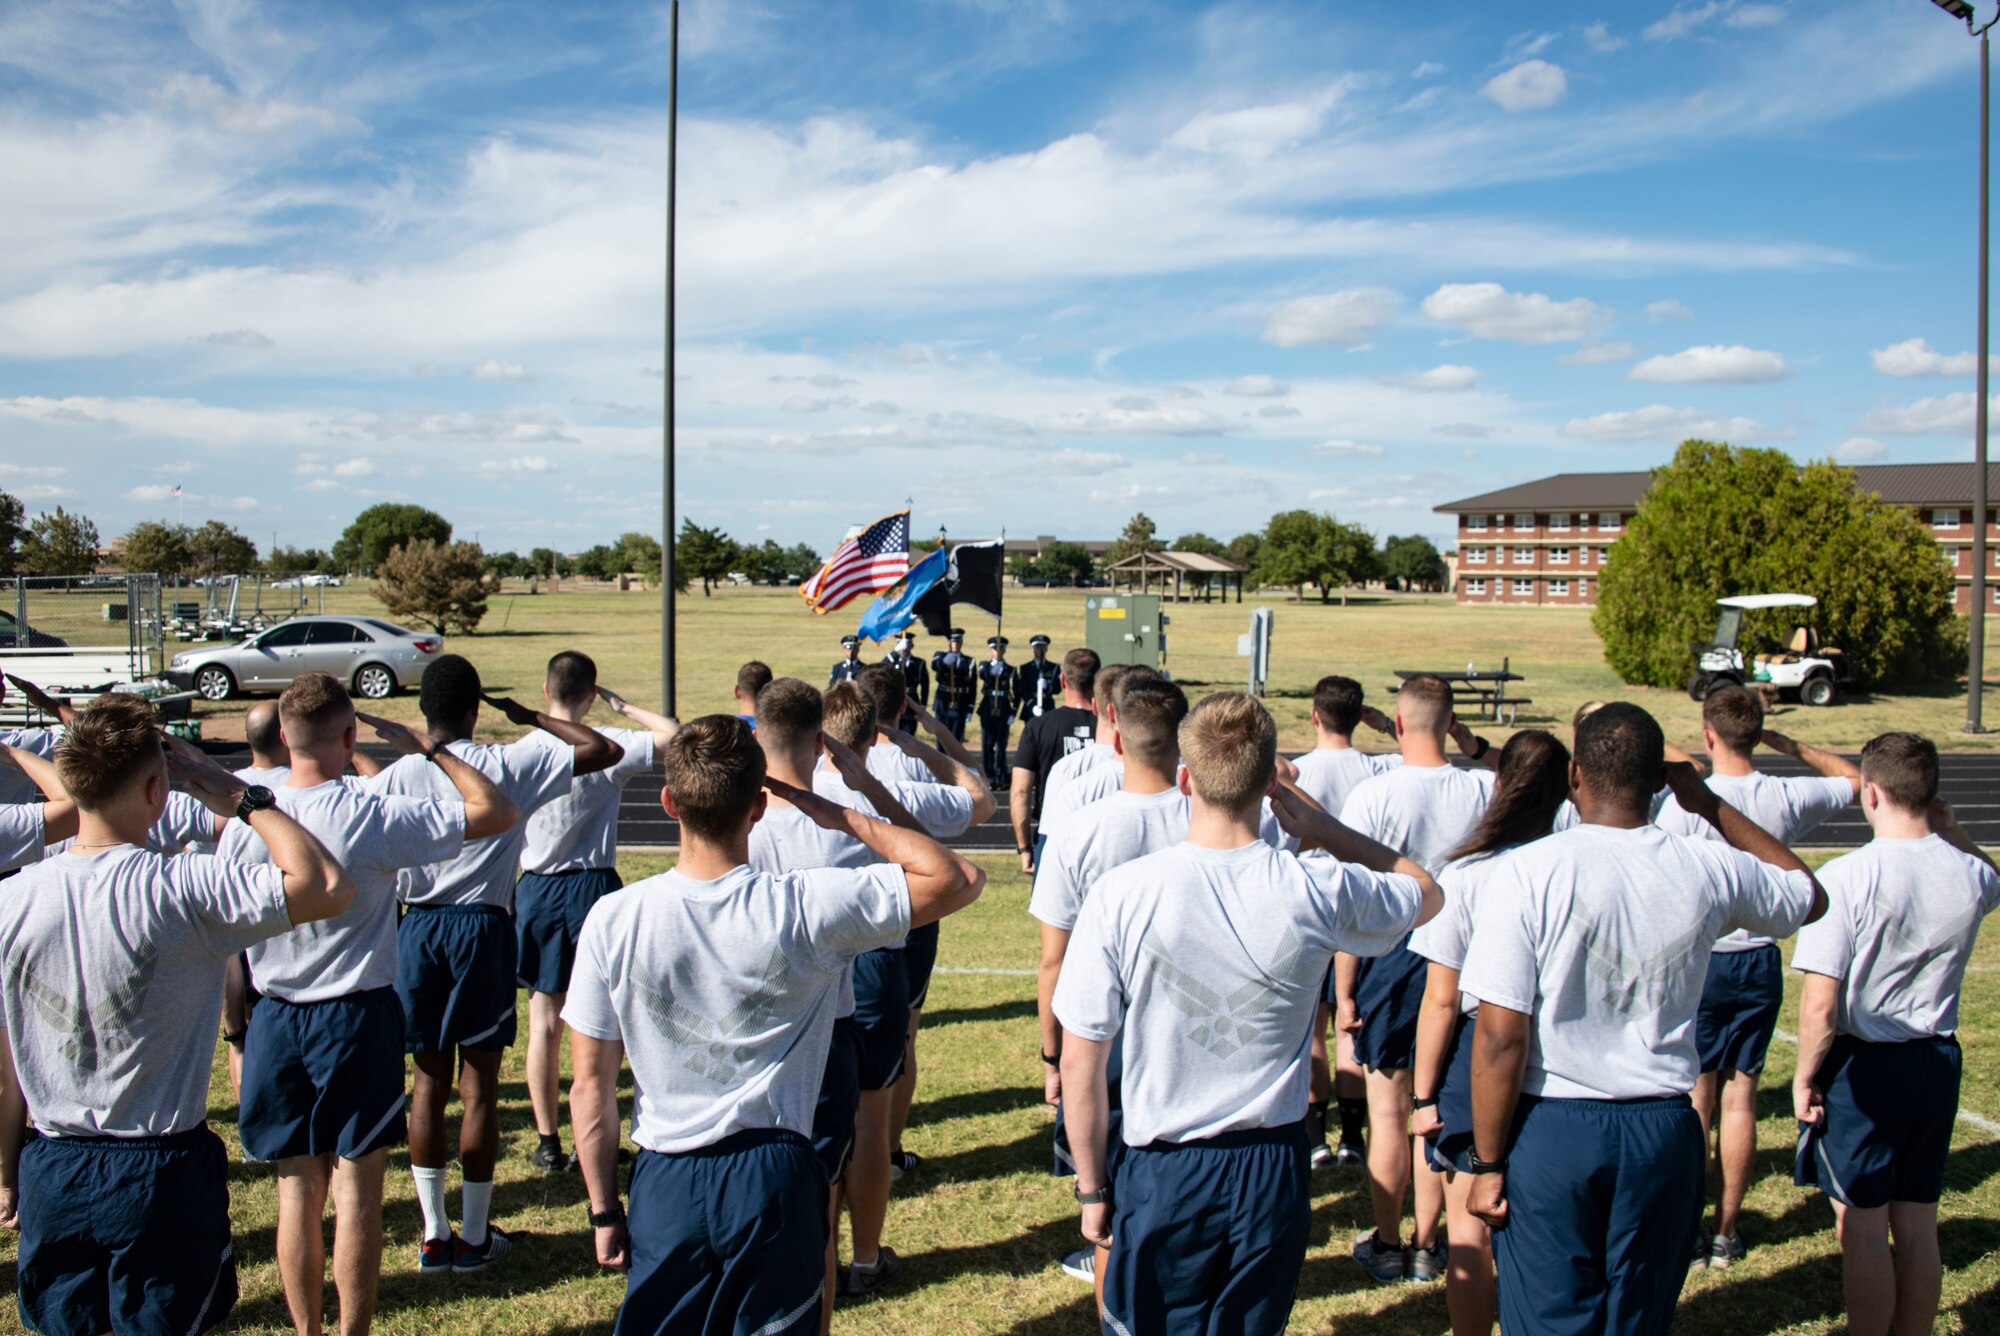 U.S. Air Force students of the 97th Training Squadron salute during reveille for the start of the 24-hour POW/MIA remembrance run